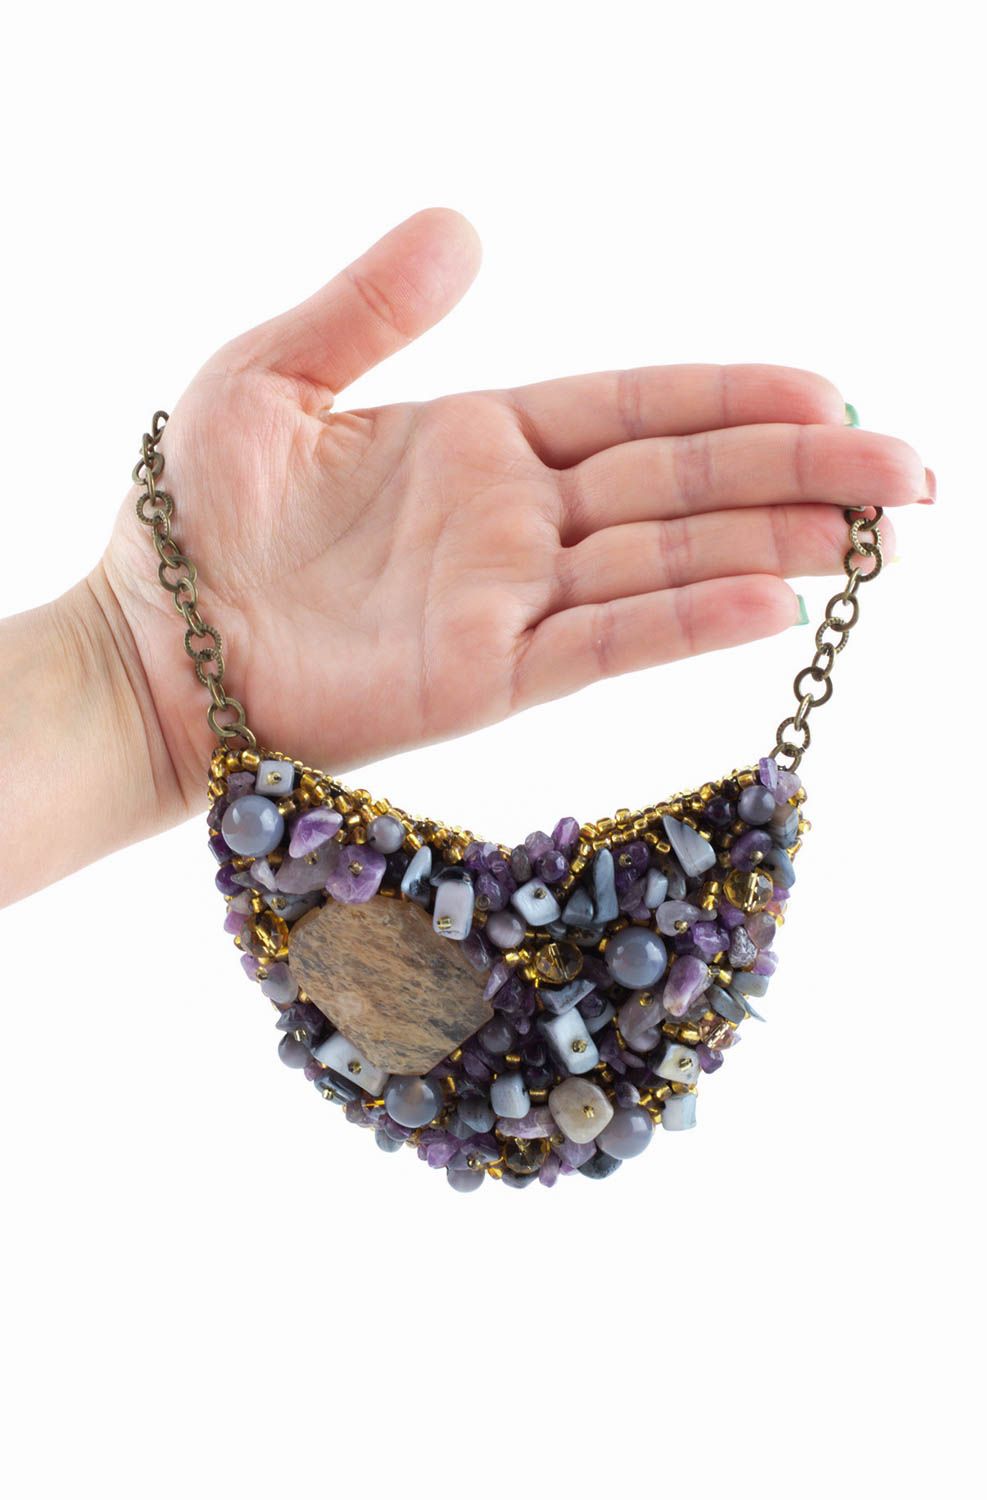 Handmade unusual necklace elegant evening necklace jewelry with natural stone photo 5